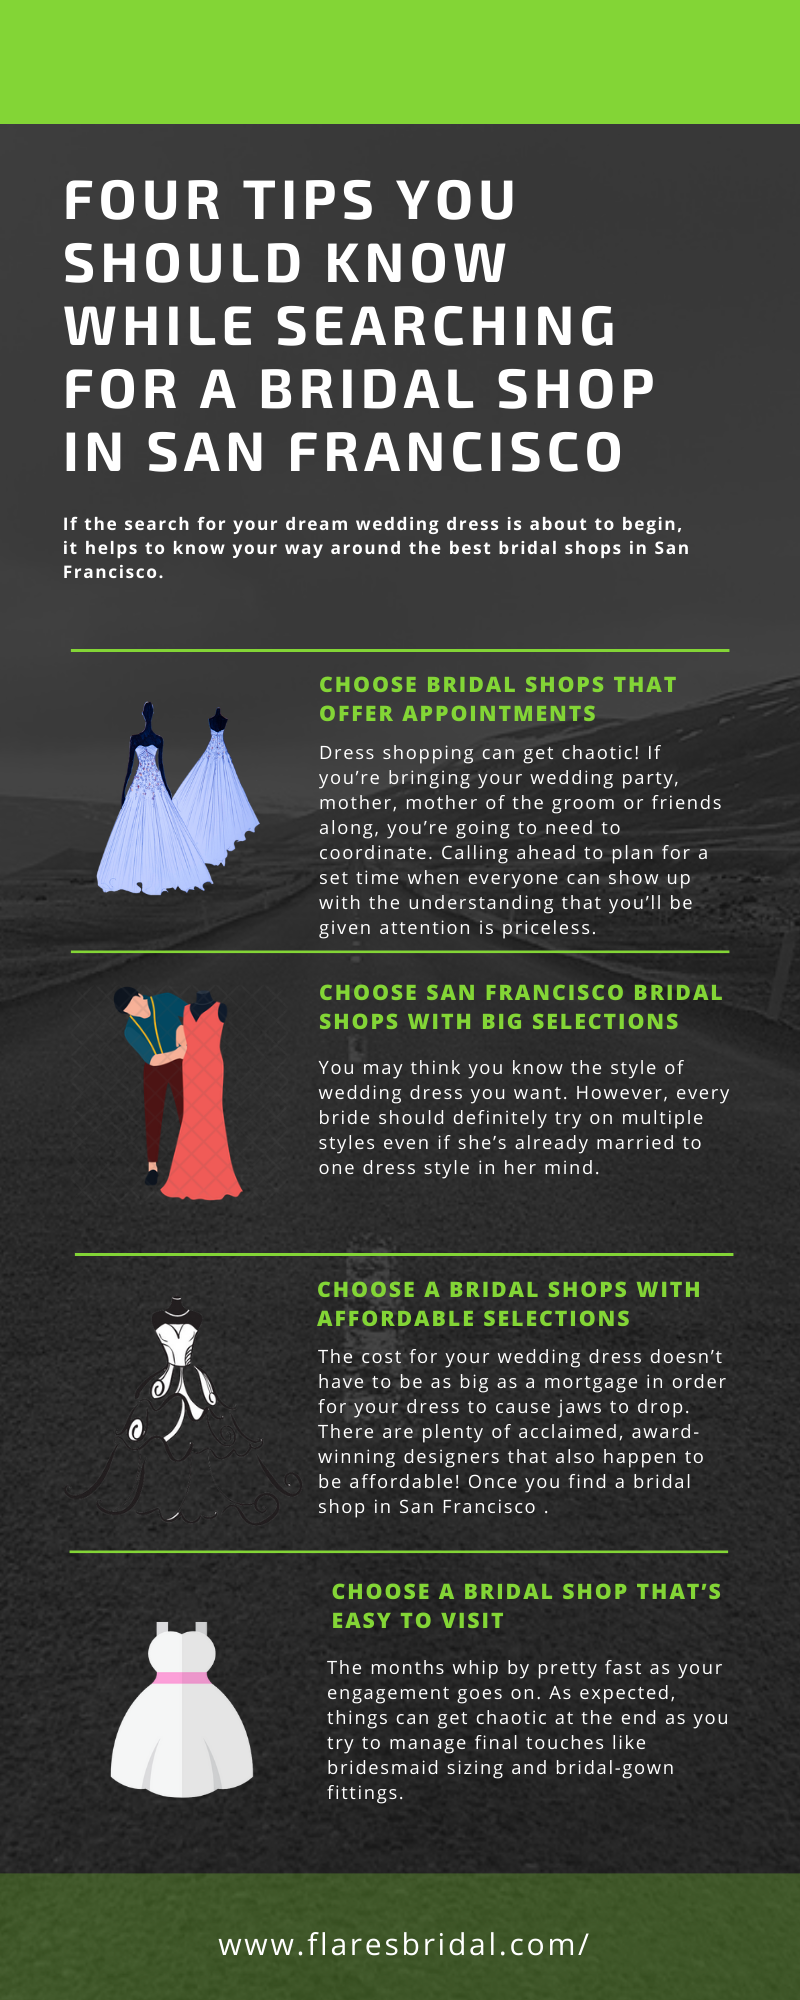 Four Tips You Should Know While Searching for a Bridal Shop in San Francisco If the search for your dream wedding dress is about to begin, it helps to know your way around the best bridal shops in San Francisco.  https://flaresbridal.com/
 by flaresbridal